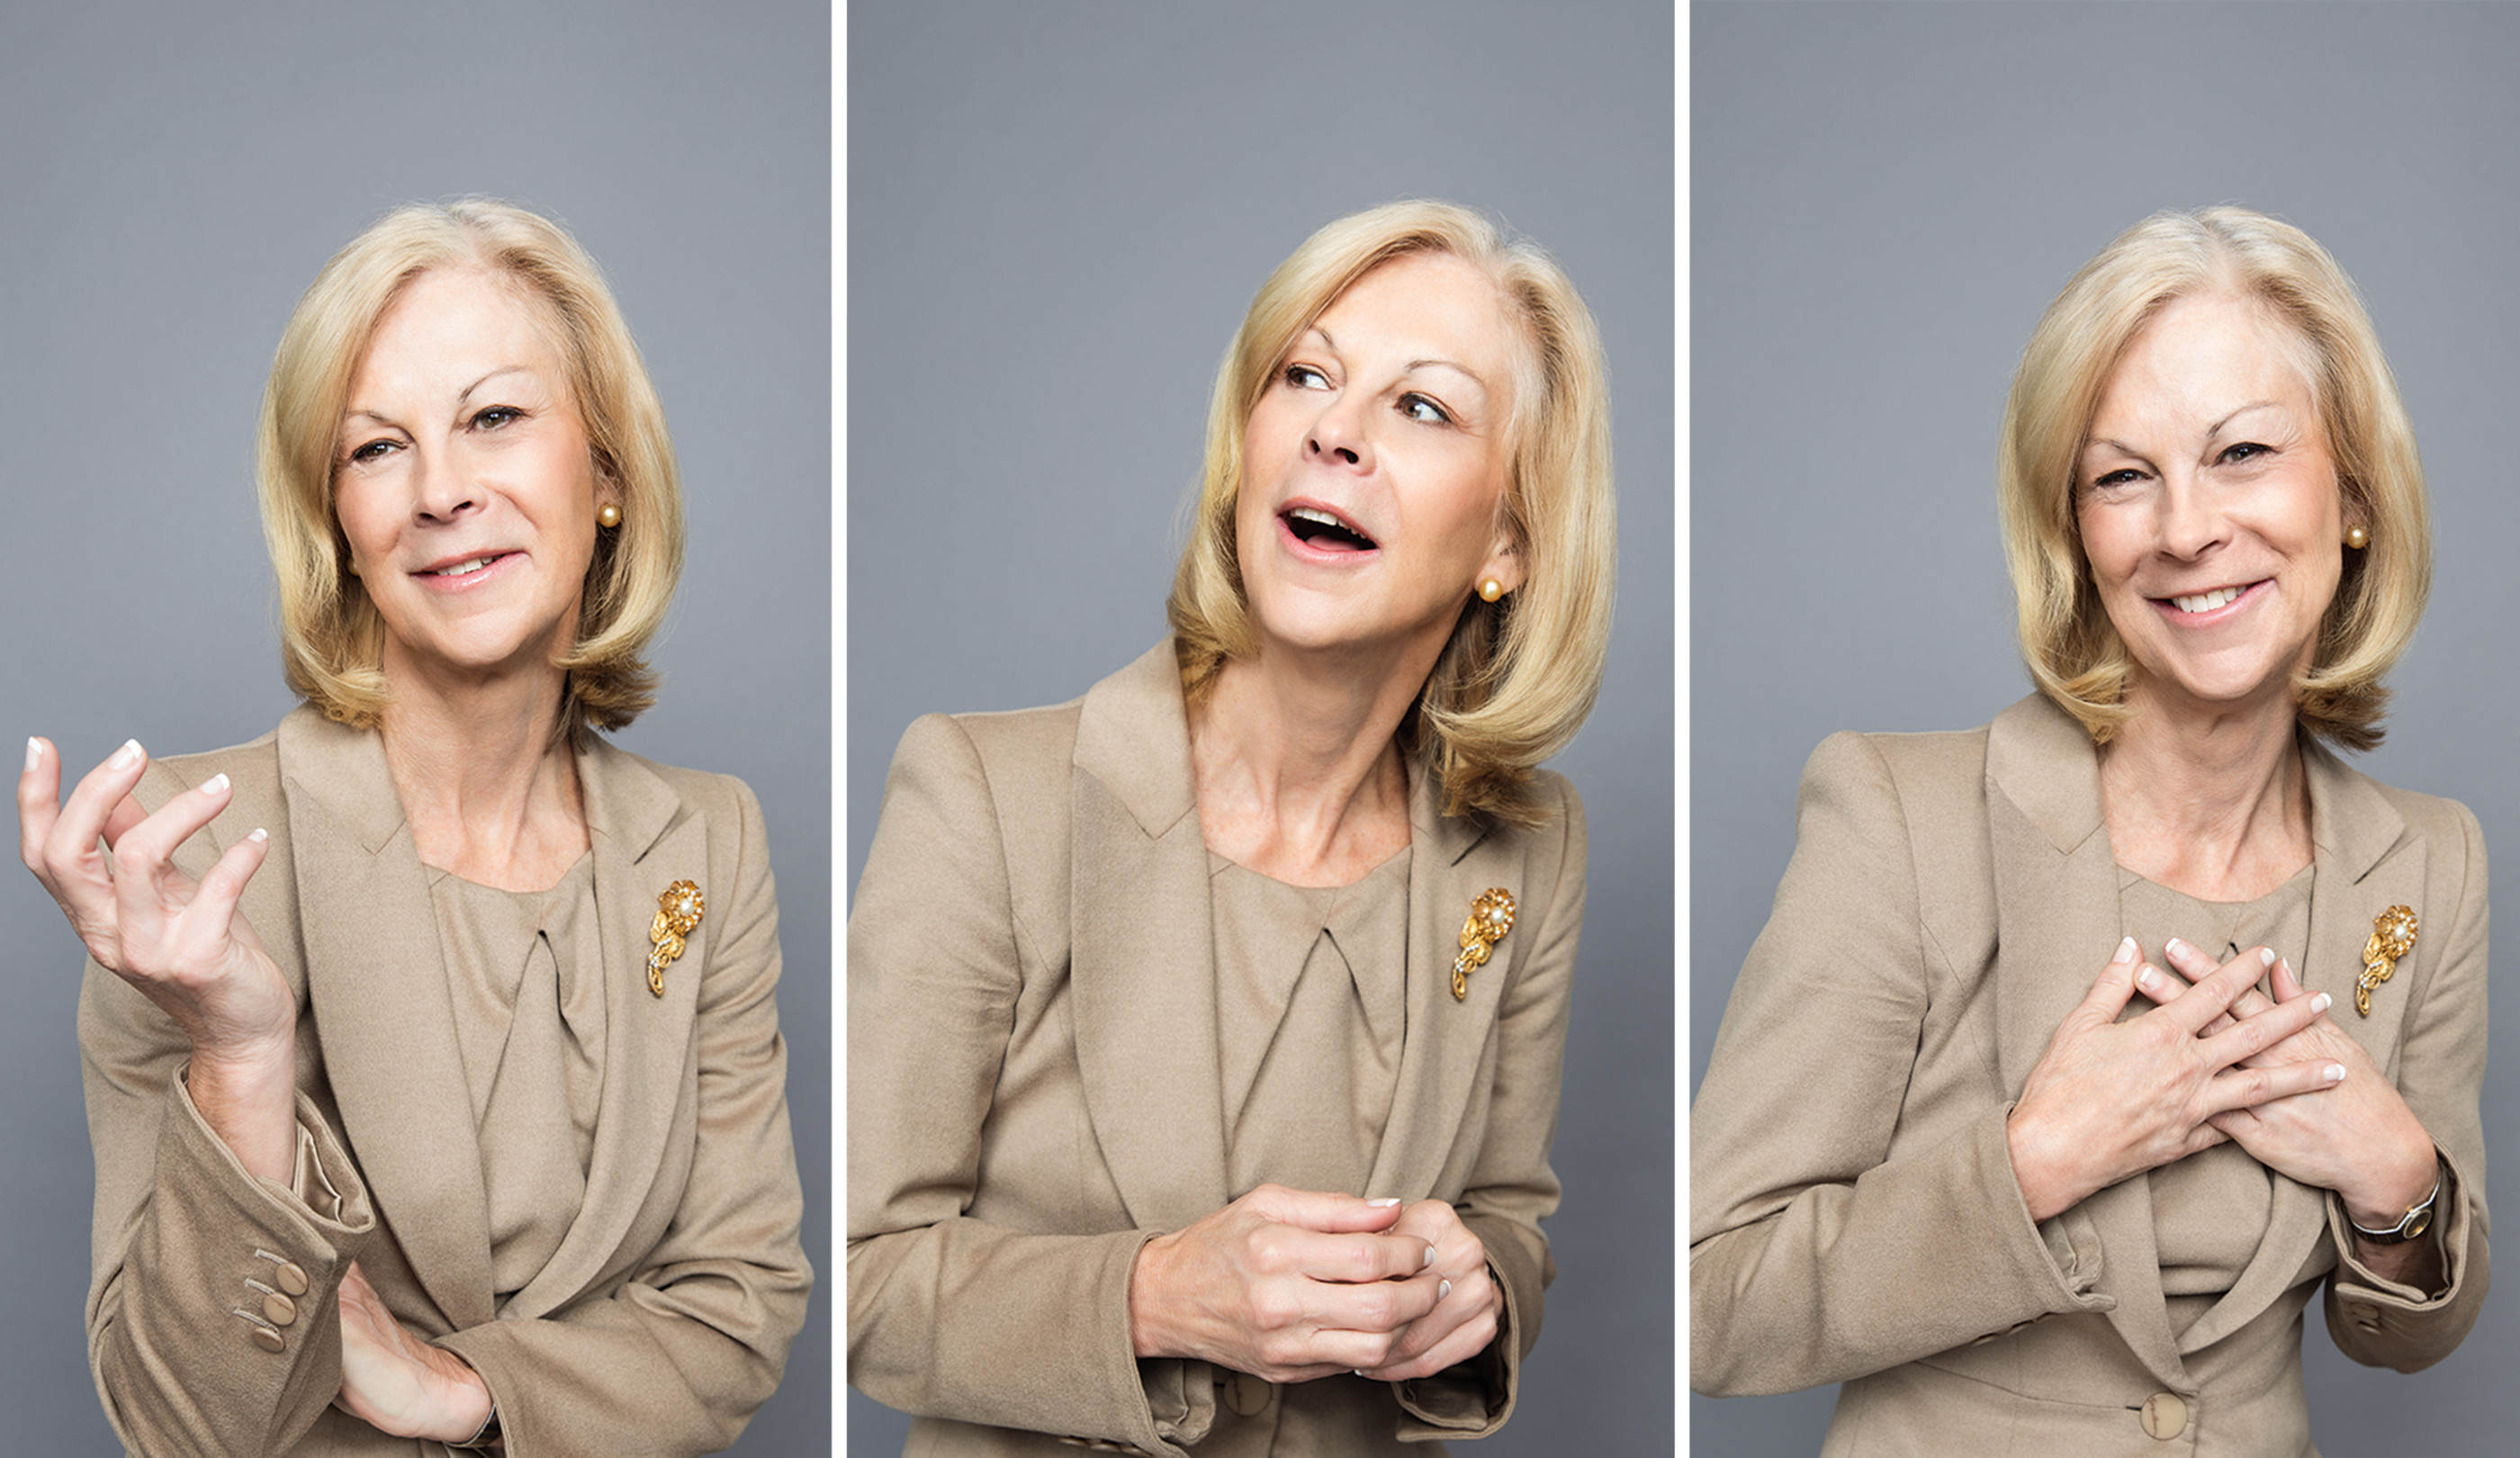 Christie Hefner Opens Up About Her Years at the Helm, Working for Hef and Feminist Politics pic